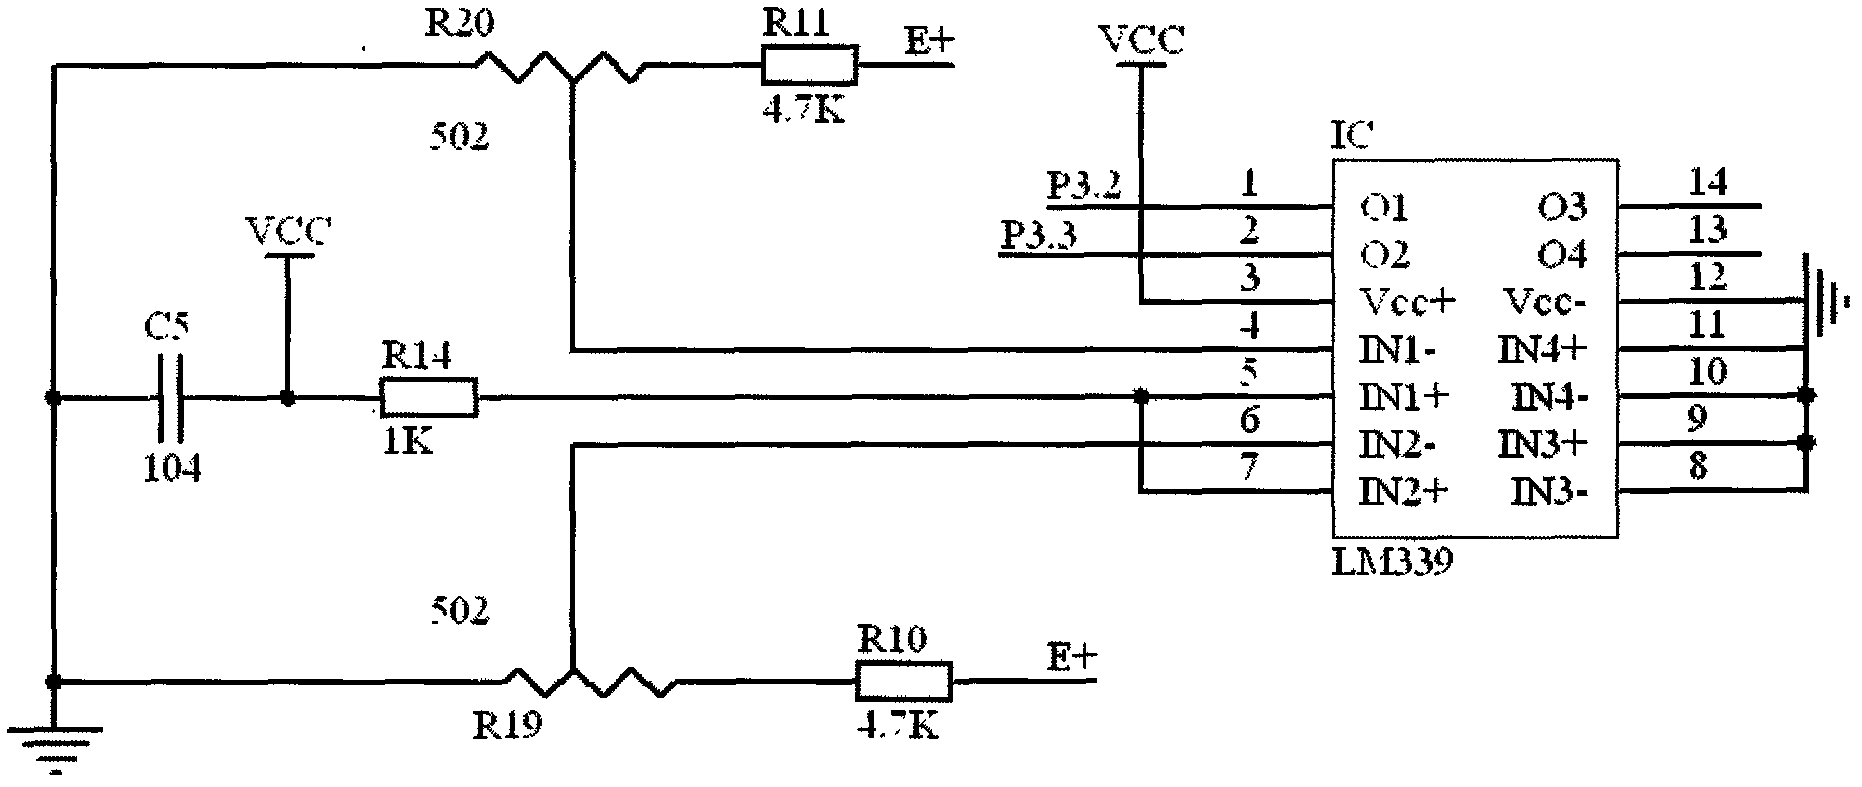 Alternating current-direct current two-level isolated direct current power device